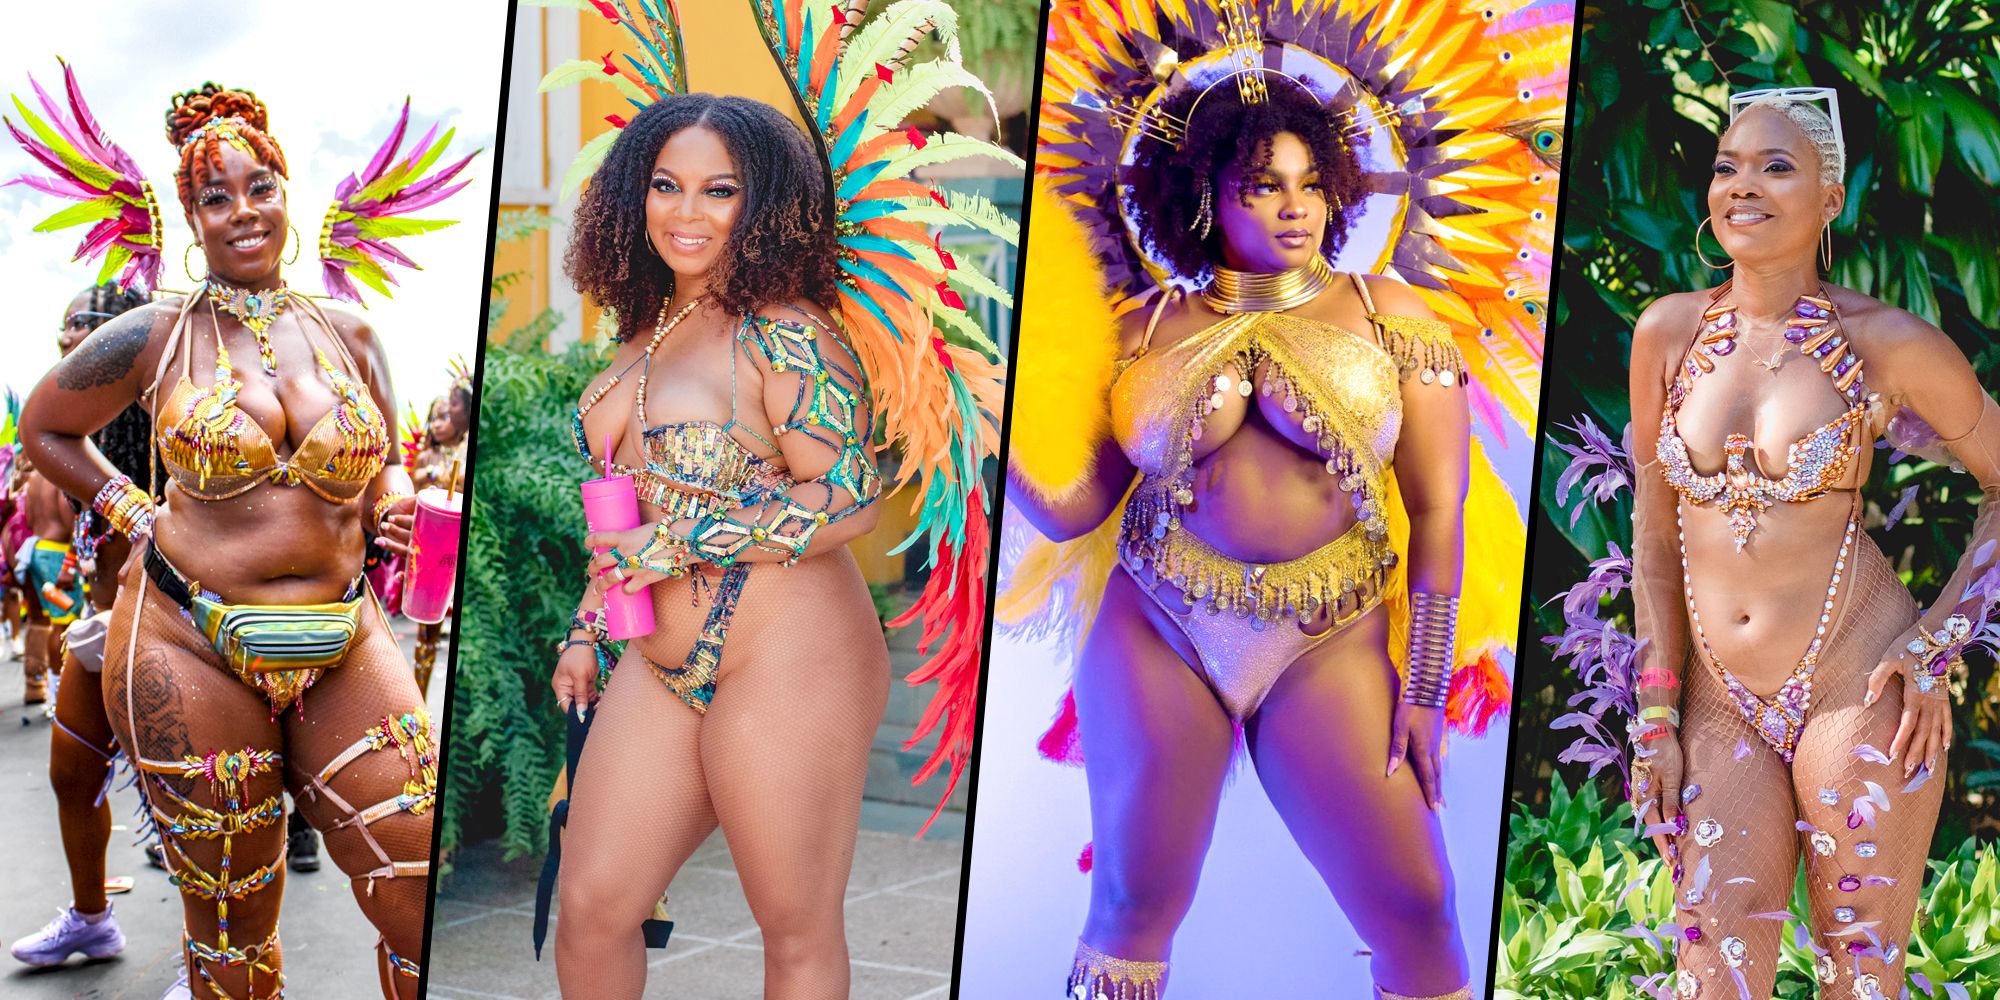 Diversity shines in every size! Embracing the beauty of all body